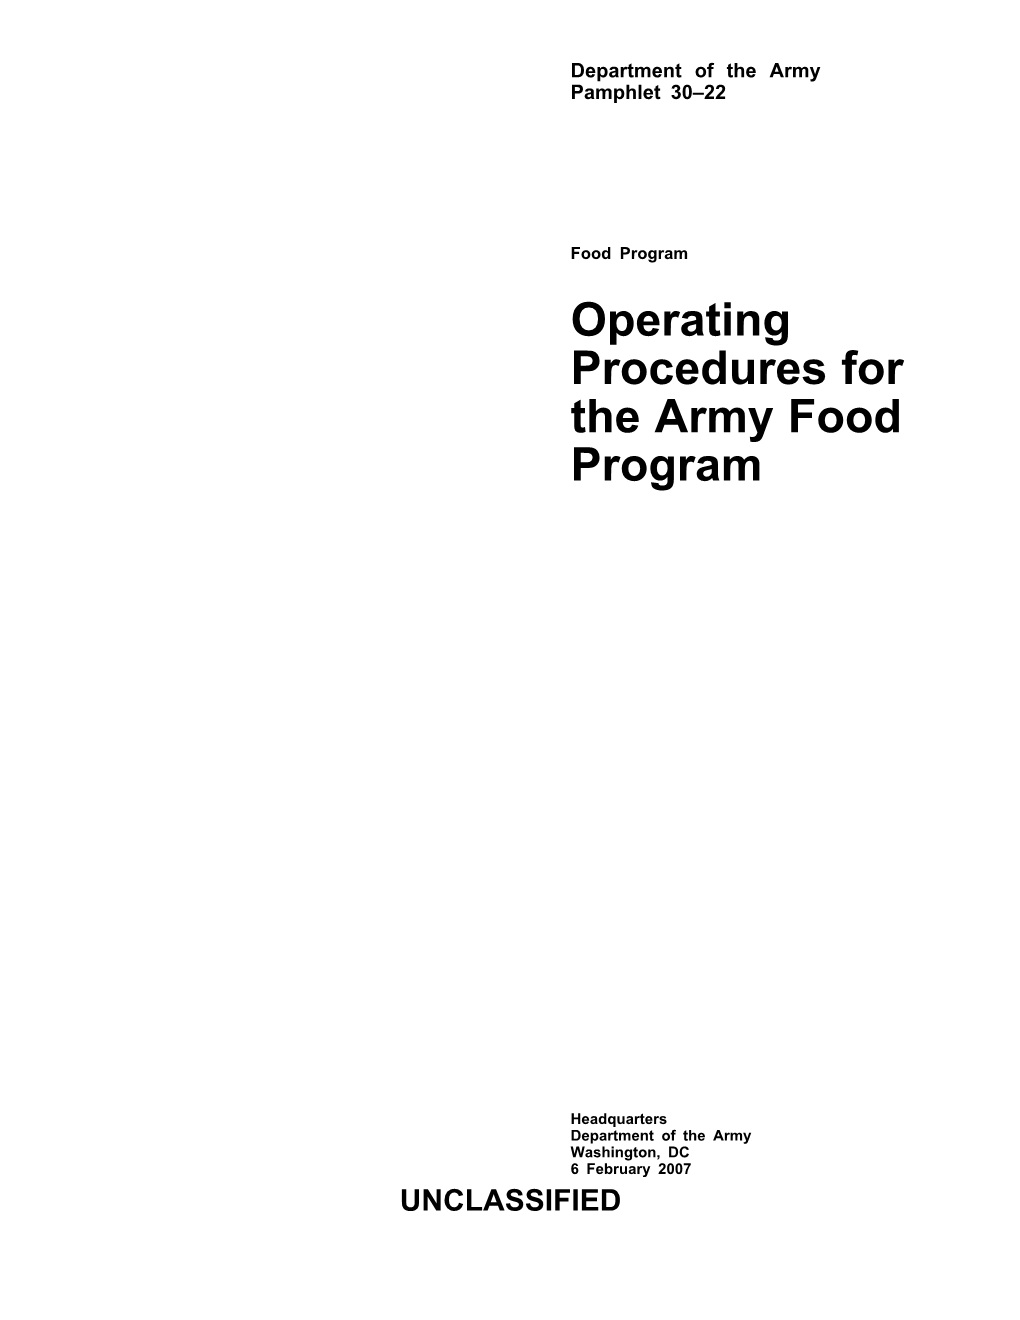 DA PAM 30-22 Operating Procedures for the Army Food Program